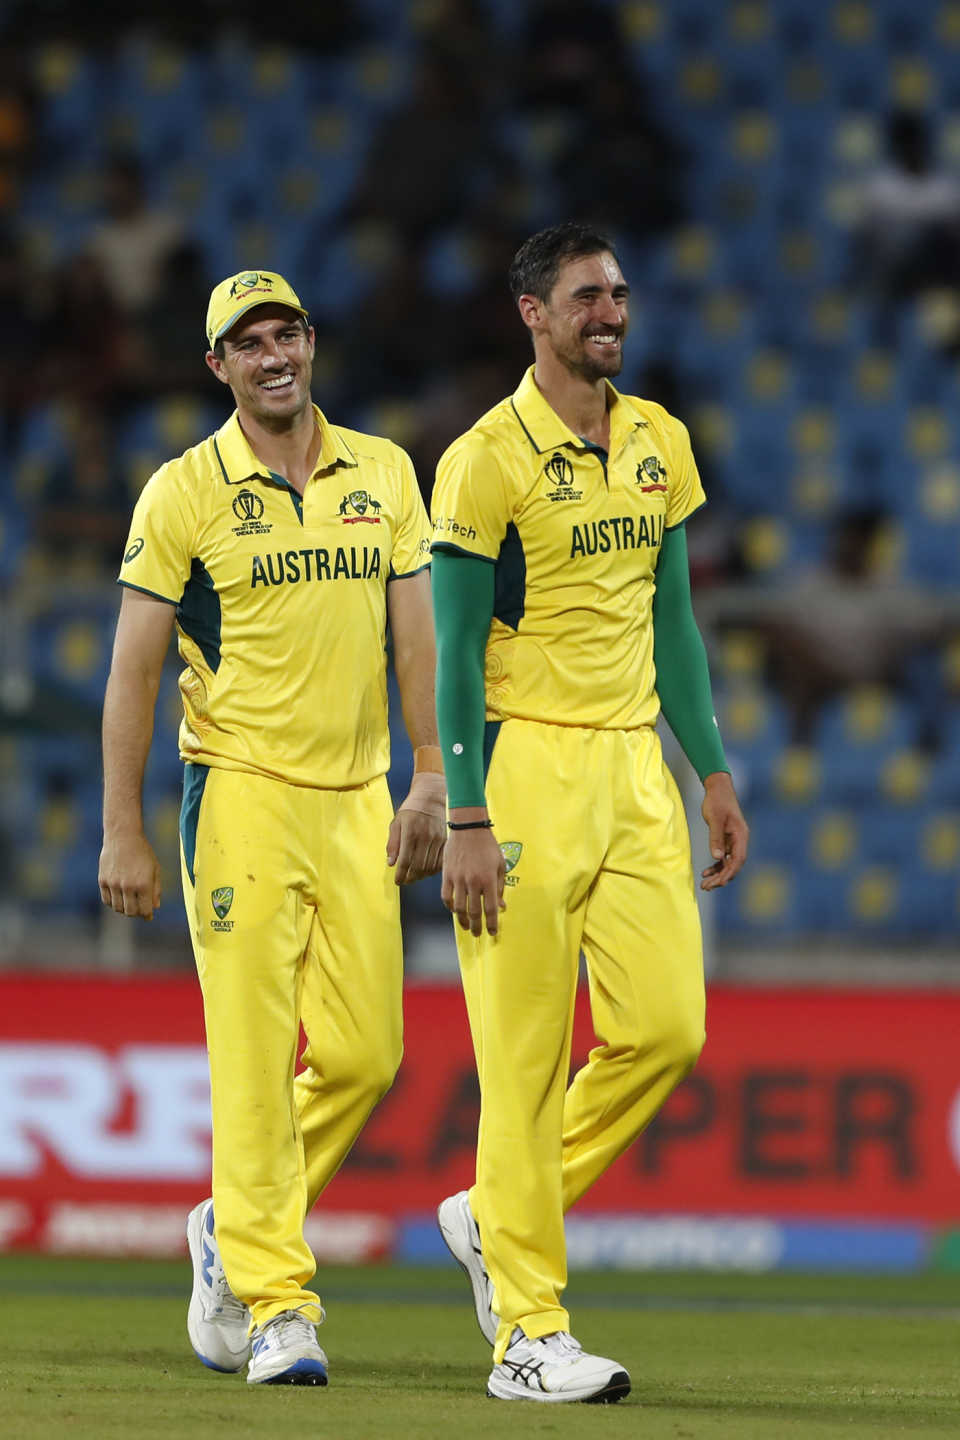 Smiling assassins: Pat Cummins and Mitchell Starc are in a good mood after the latter cut through Netherlands' top order